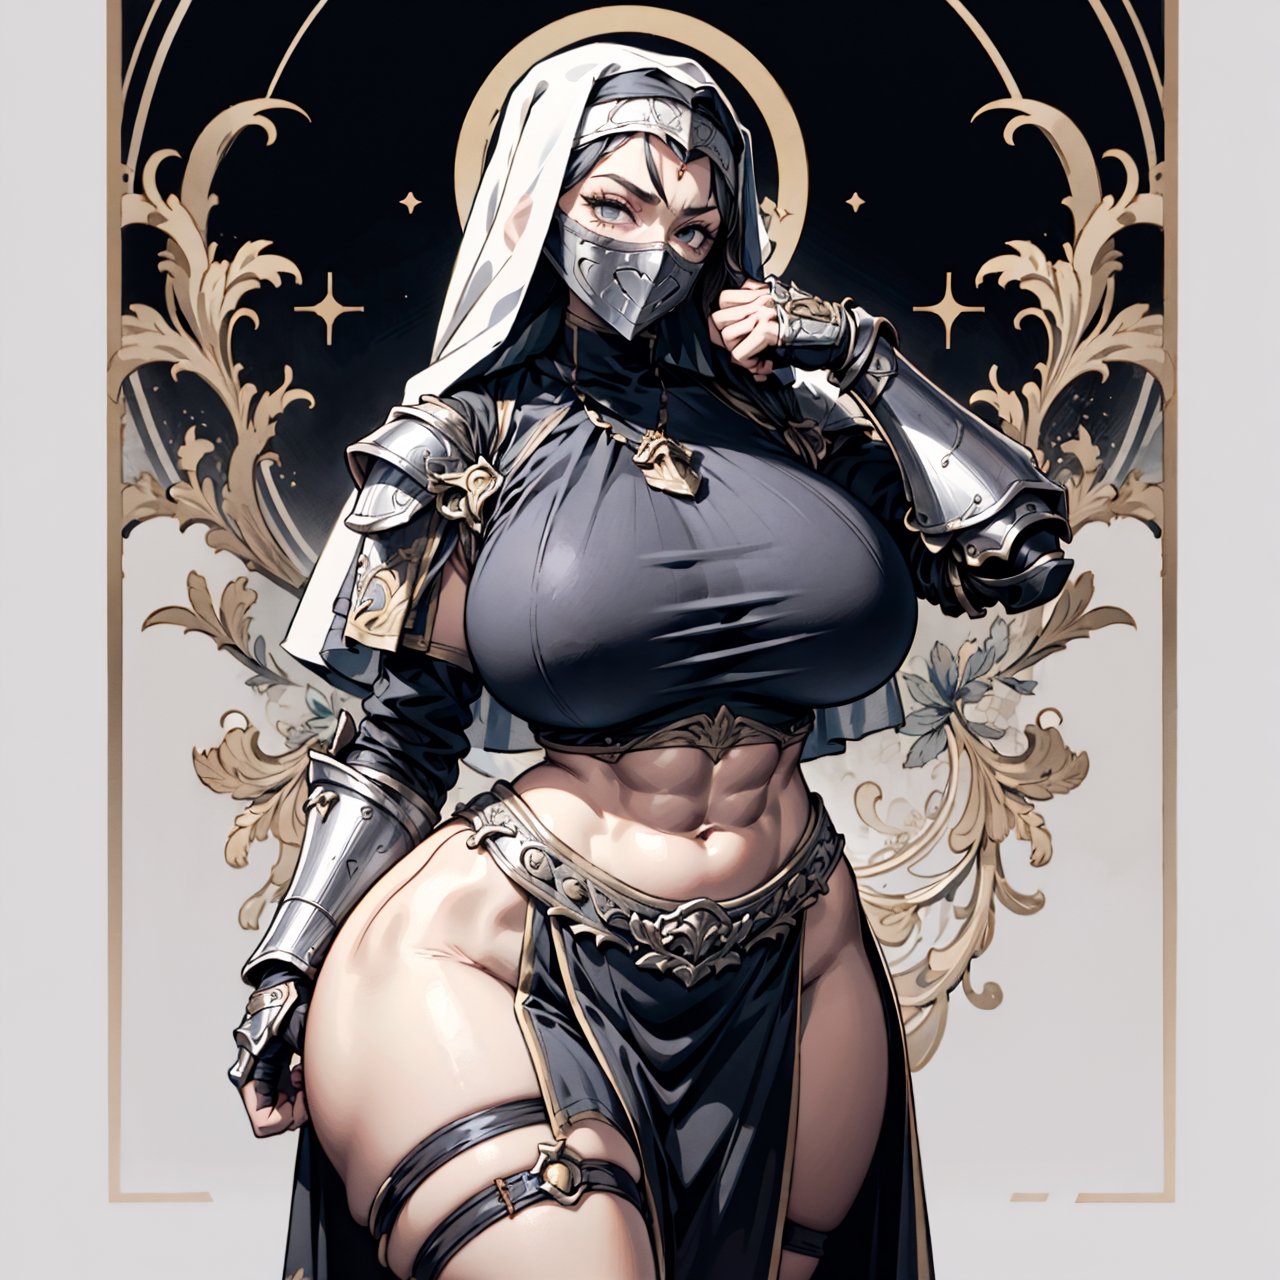 a fantasy nun, ((knight armor, pauldrons, vambraces, gauntlets)), revealing clothing, (milf, curvy figure, wide hips, gigantic breasts, thicc, musclular, biceps, abs), ((covered face, veil)), 2d fantasy ink illustration with an art nouveau background, EpicArt, (monochrome), milfication, contraposto, dynamic pose,